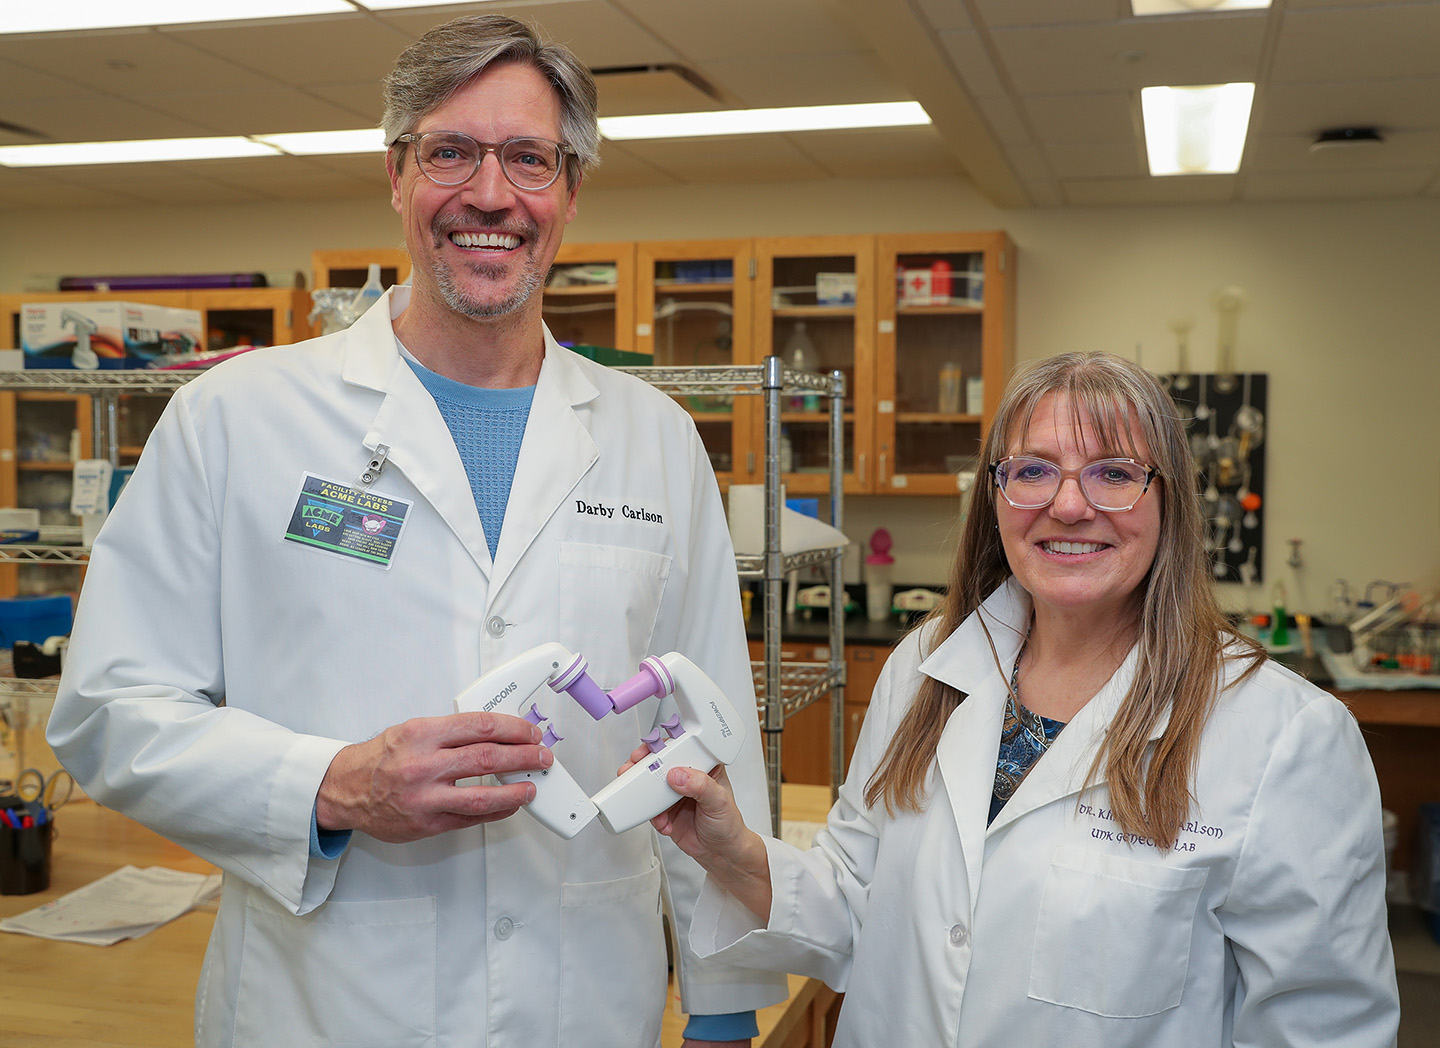 Darby and Kim Carlson both teach in the UNK Department of Biology, where he’s a senior lecturer and she’s a professor and department co-chair. They first met as undergraduate students at UNK. (Photo by Erika Pritchard, UNK Communications)